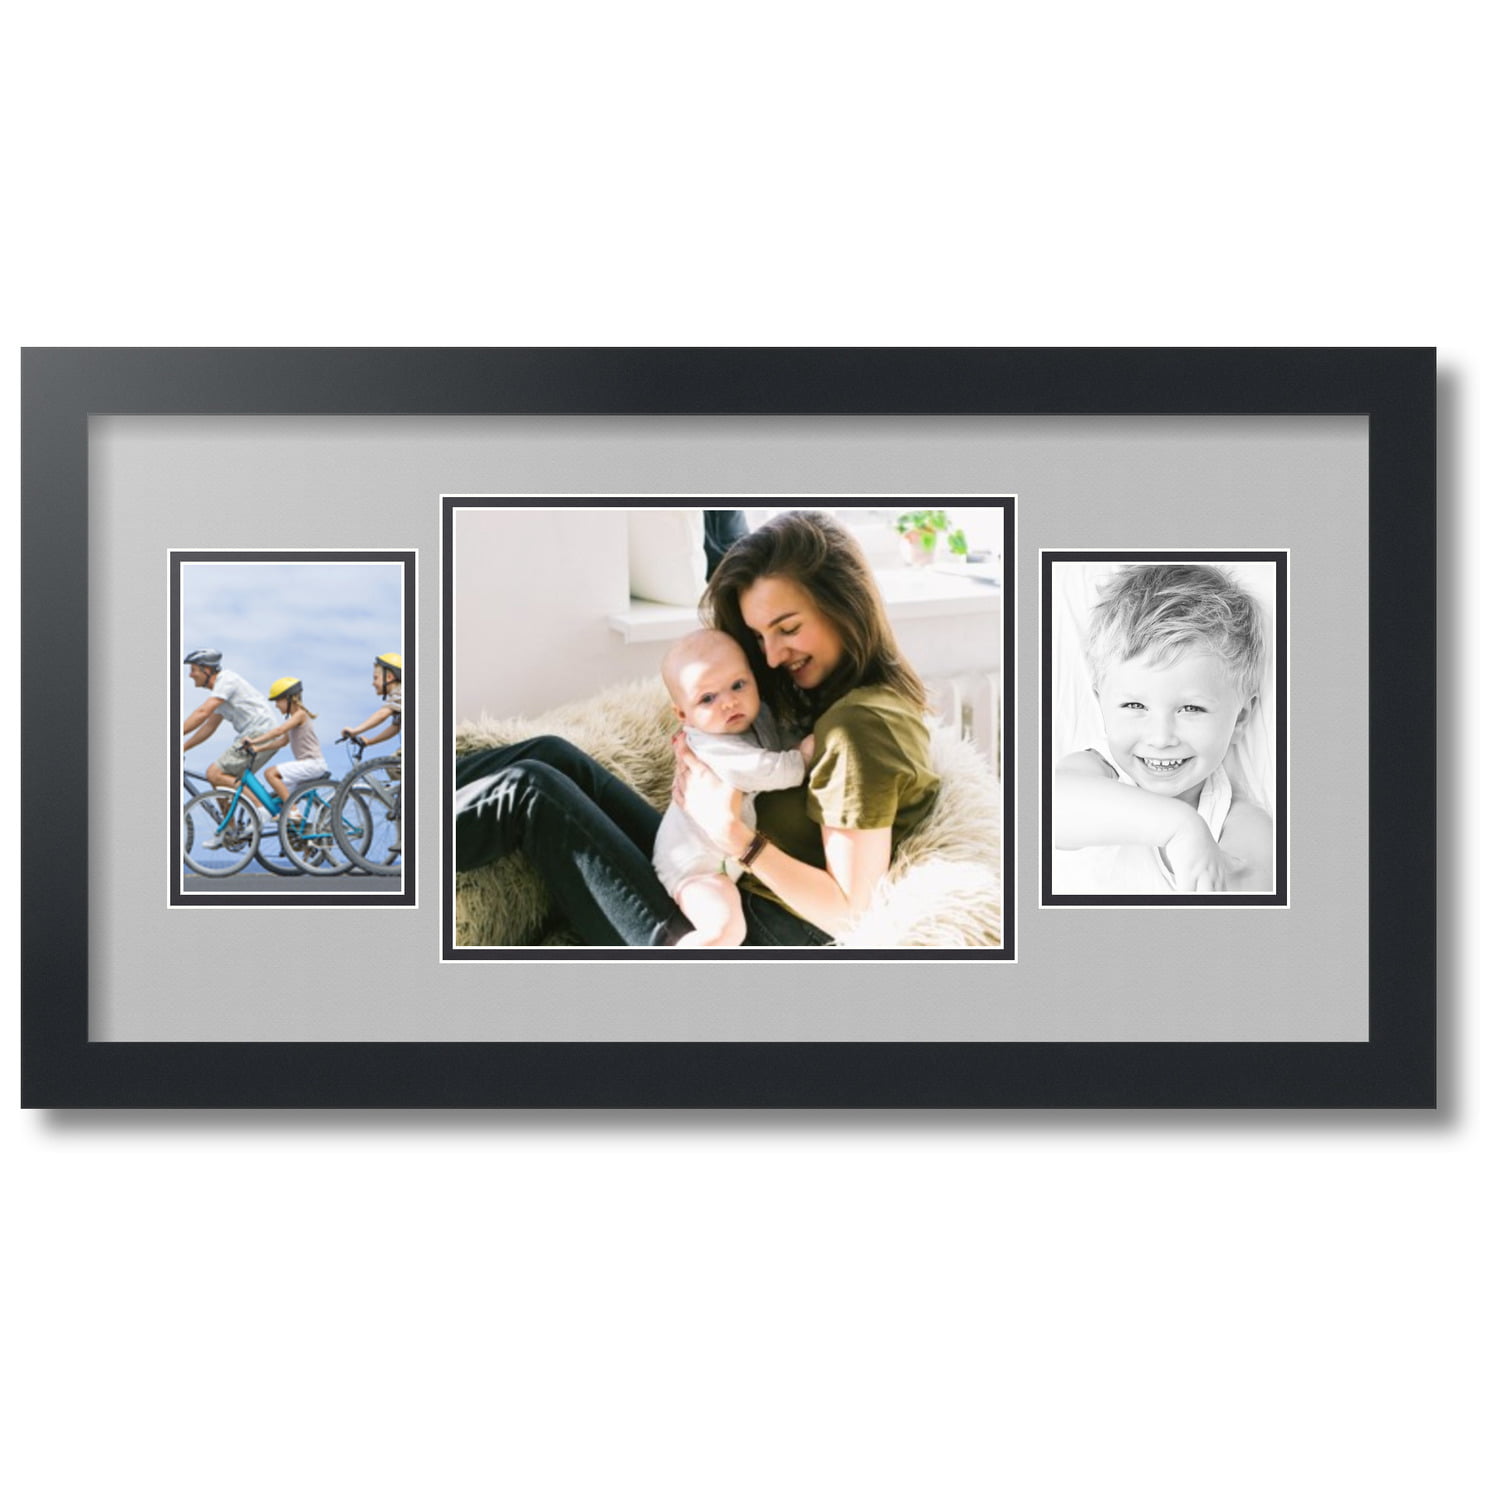 4x6 Opening ArtToFrames Matted 8x10 White Picture Frame with 2" Double Mat 